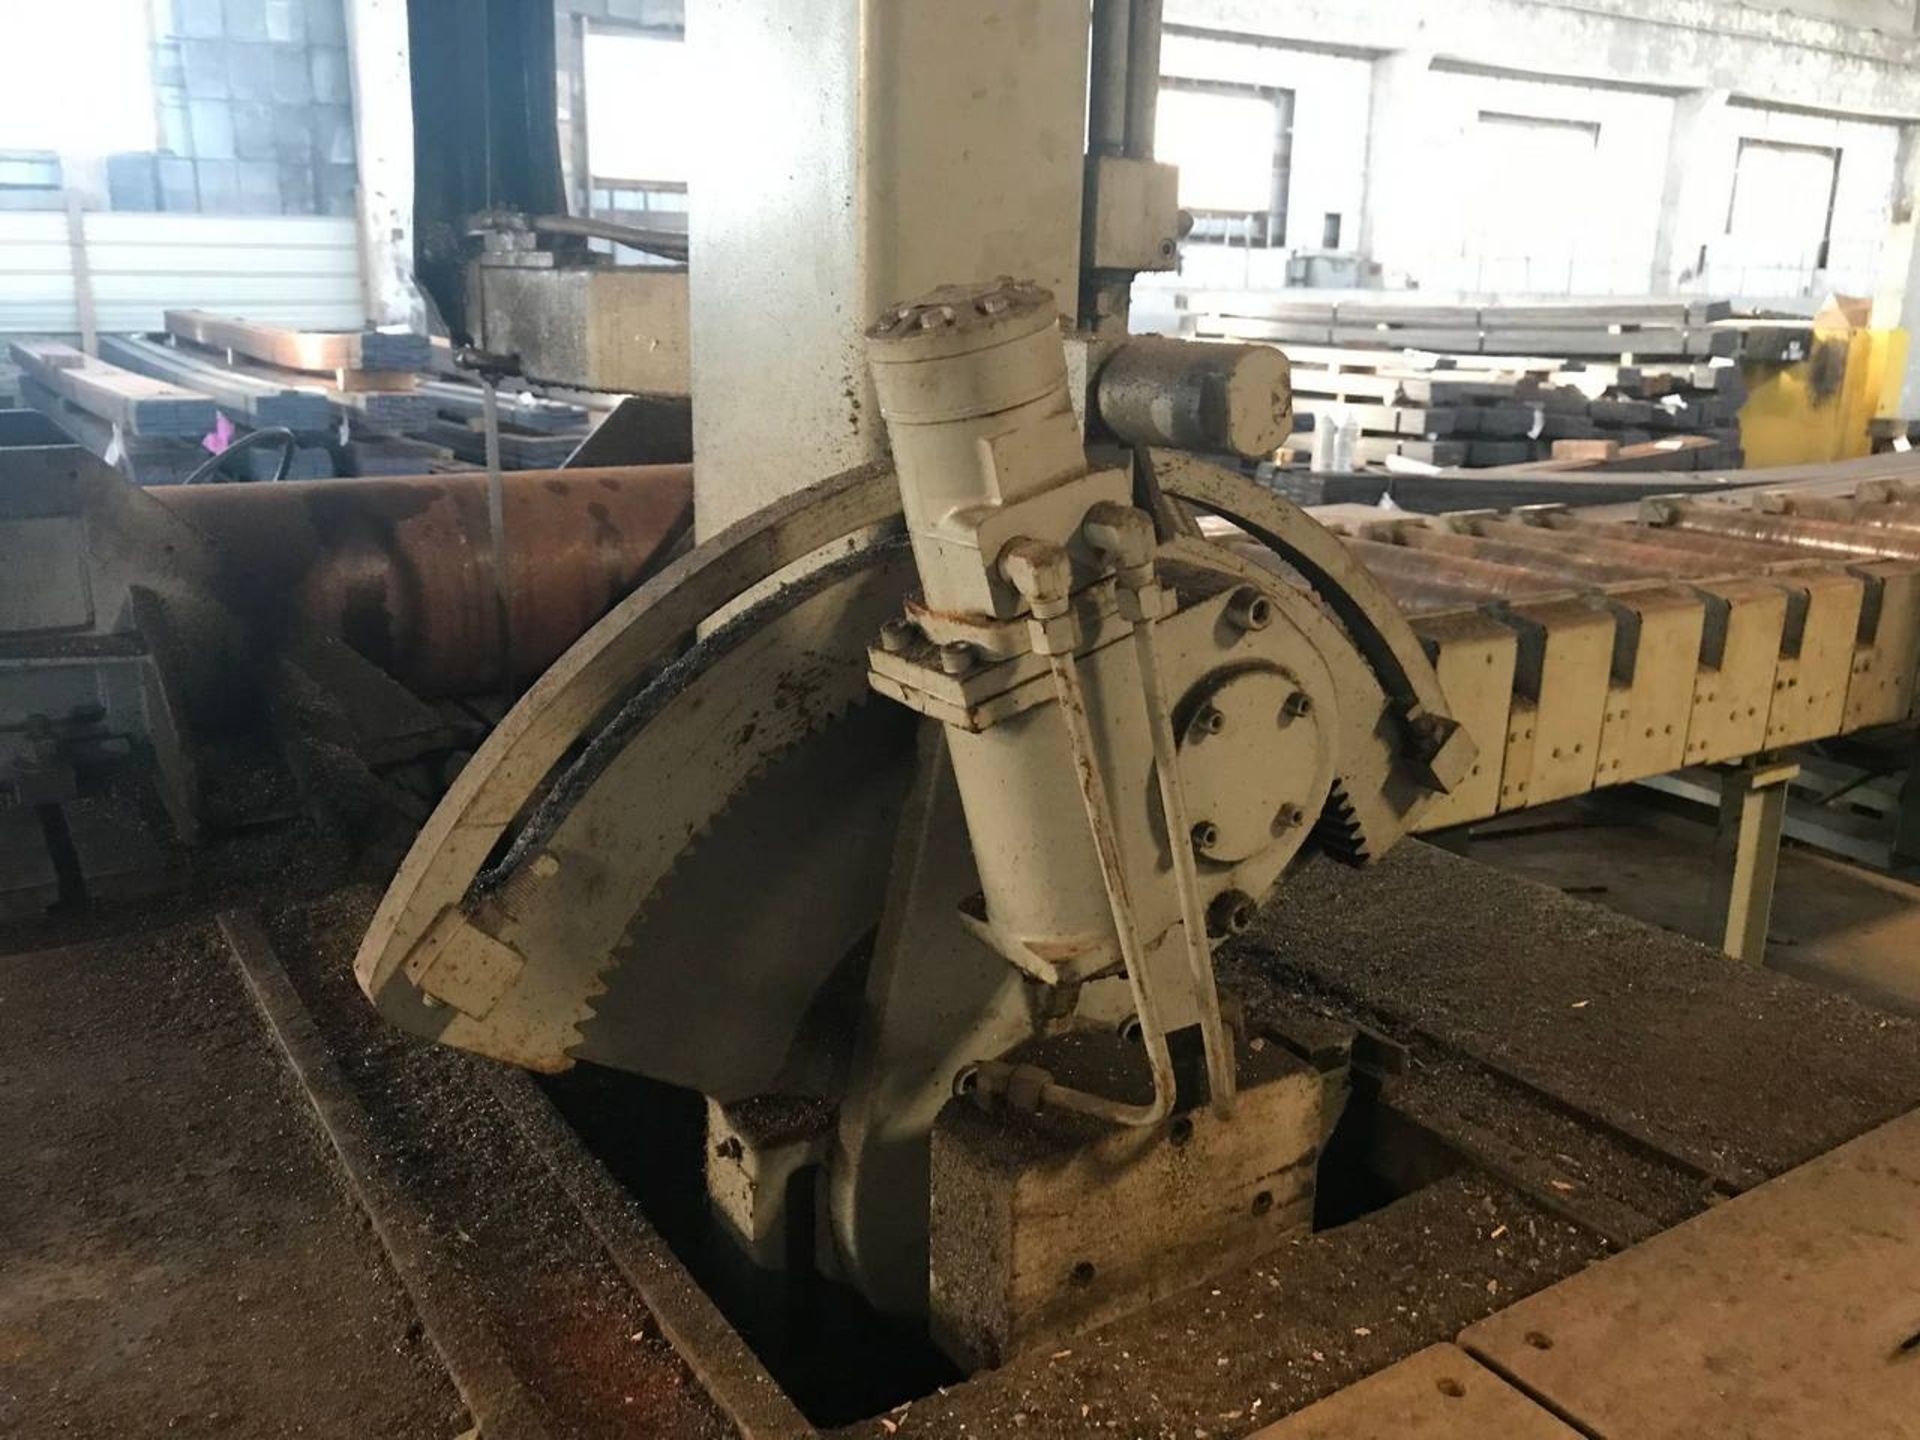 Marvel 25 Vertical Metalcutting Band Saw - Image 15 of 19